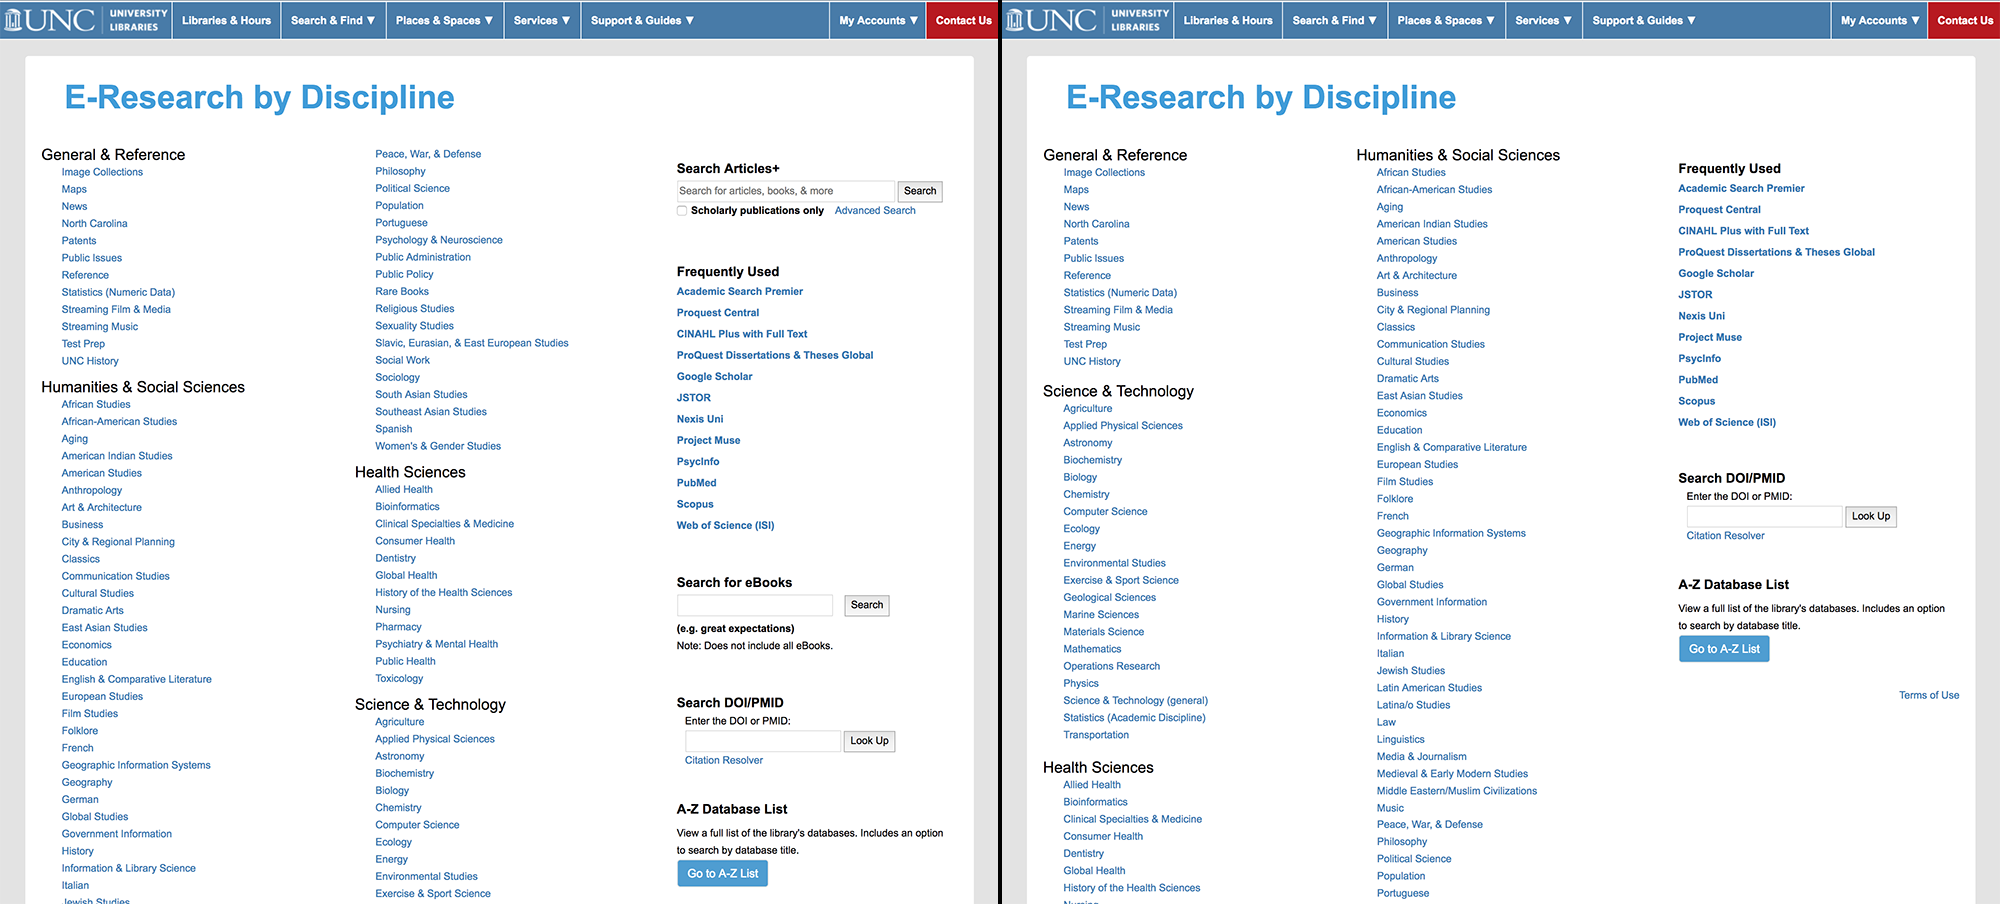 Side by side comparison of the E-Research by Discipline page before and after changes made in January 2019